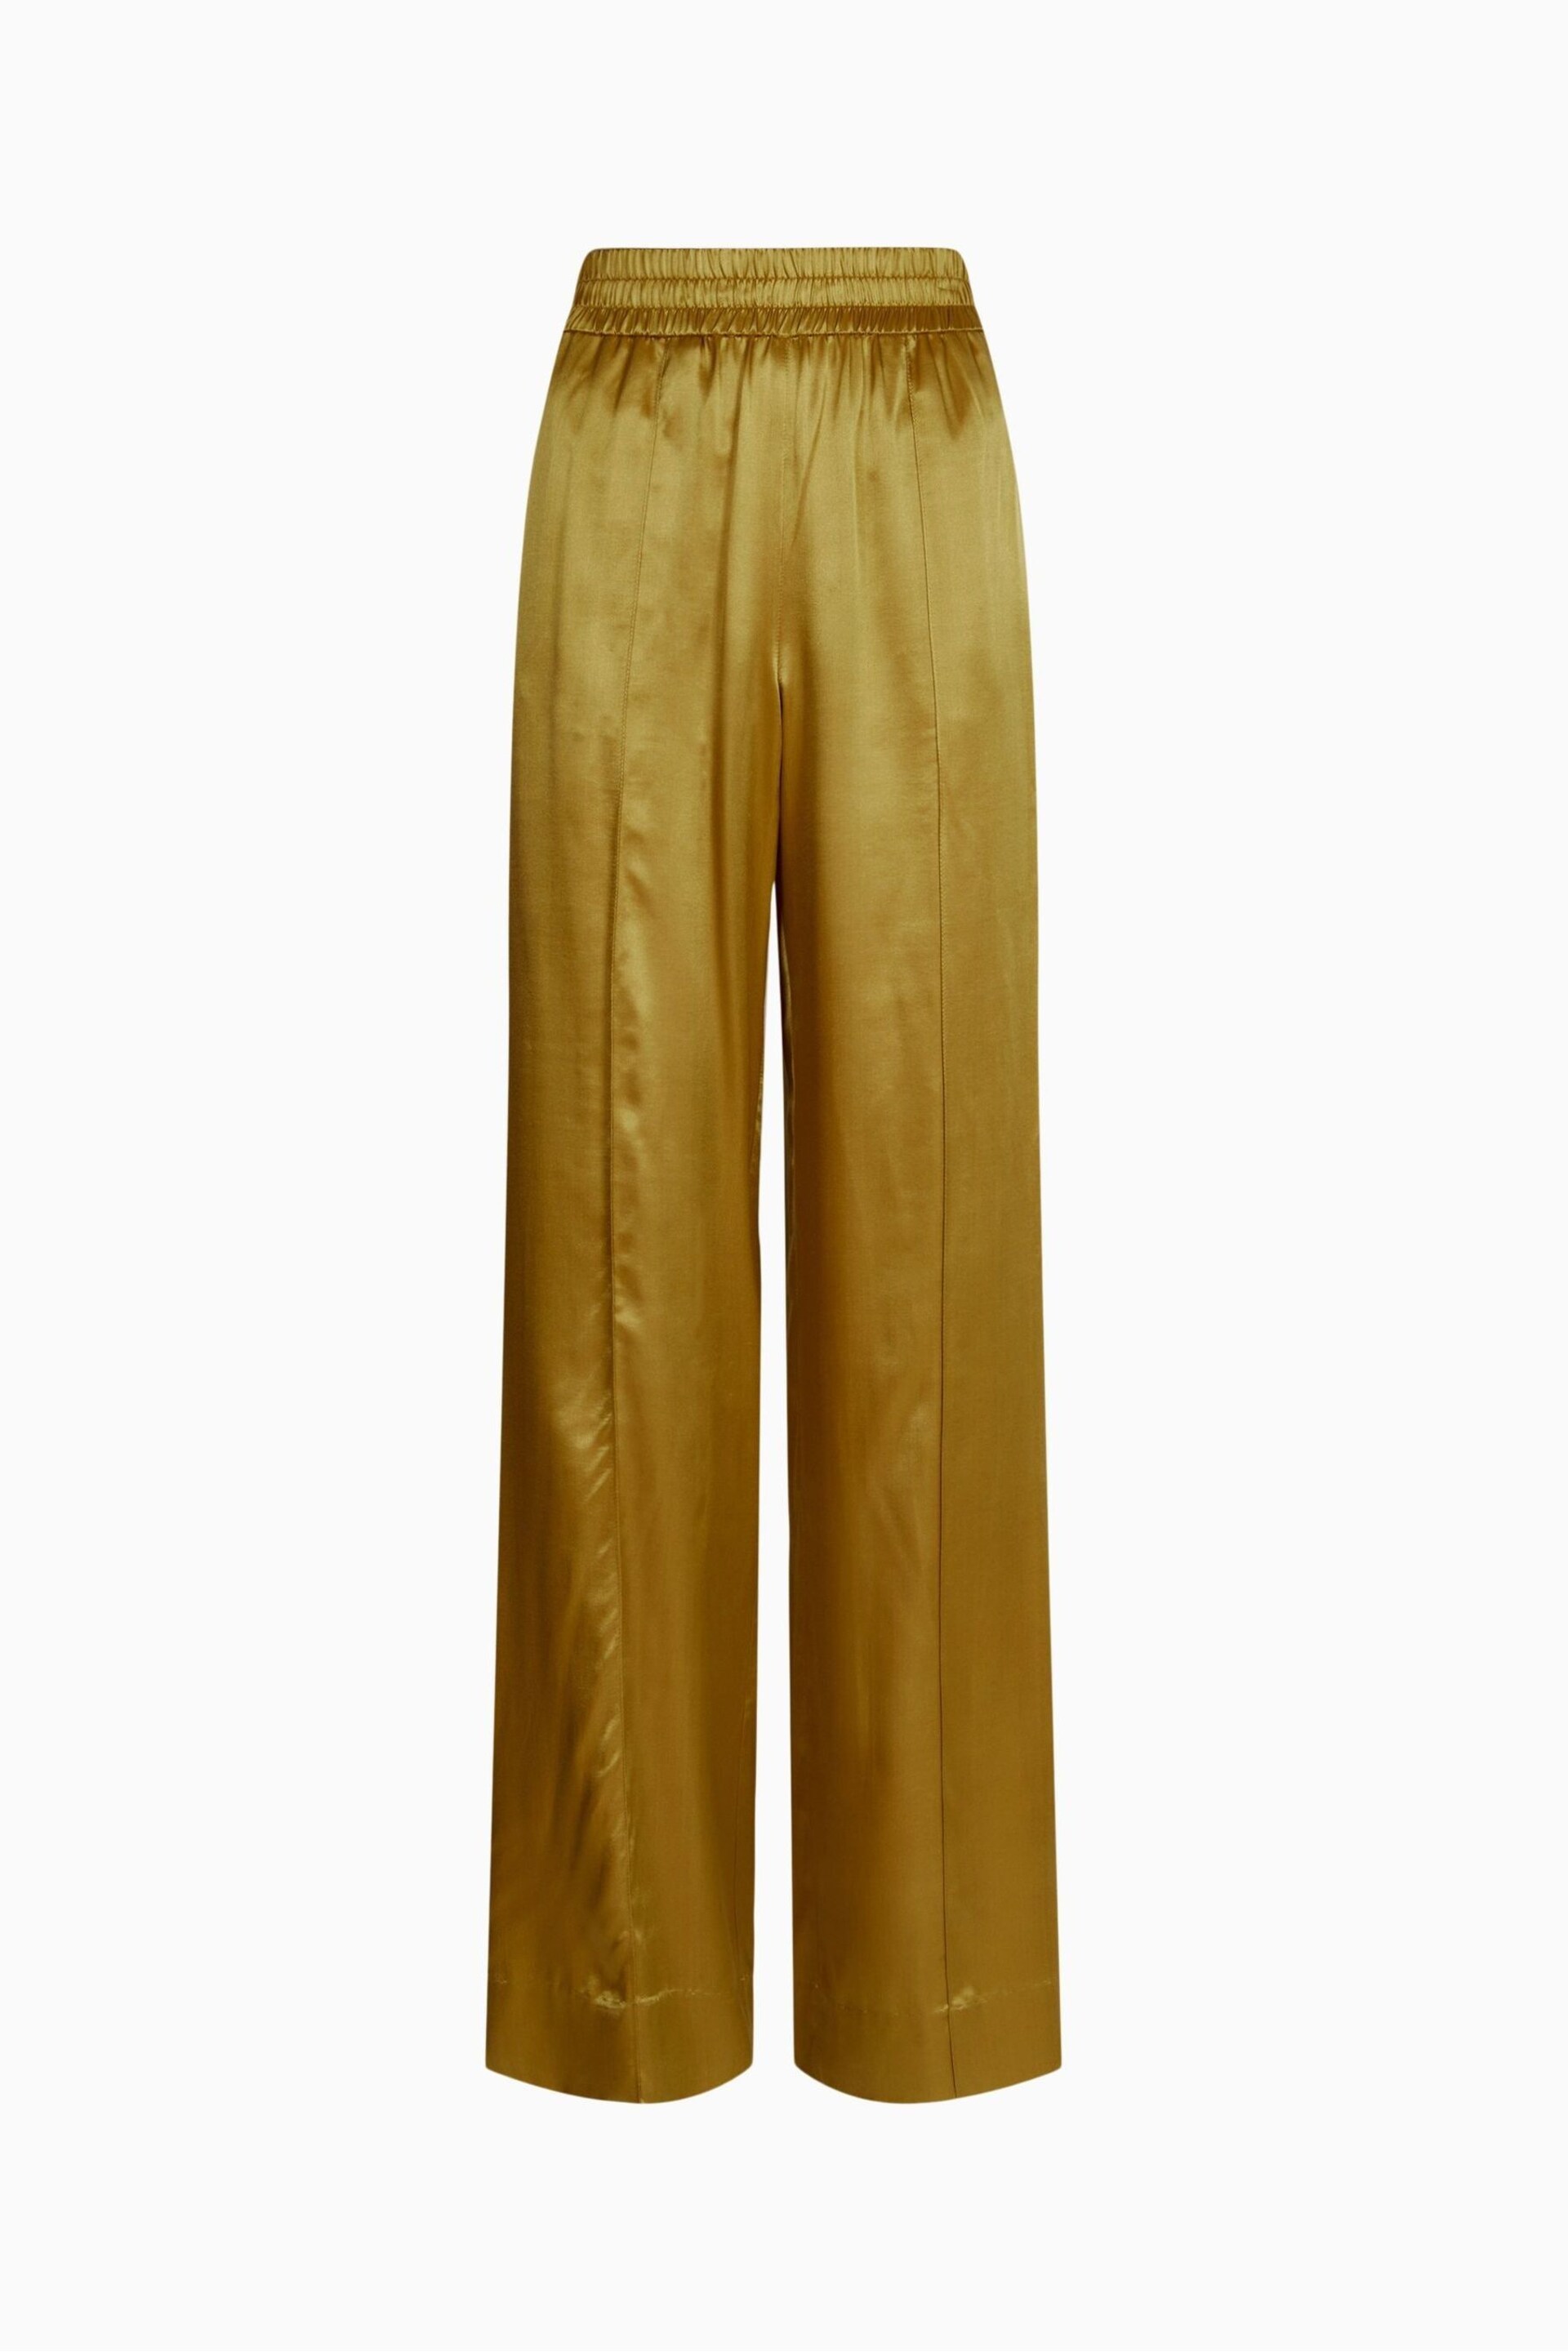 AllSaints Green Charli Trousers - Image 7 of 7